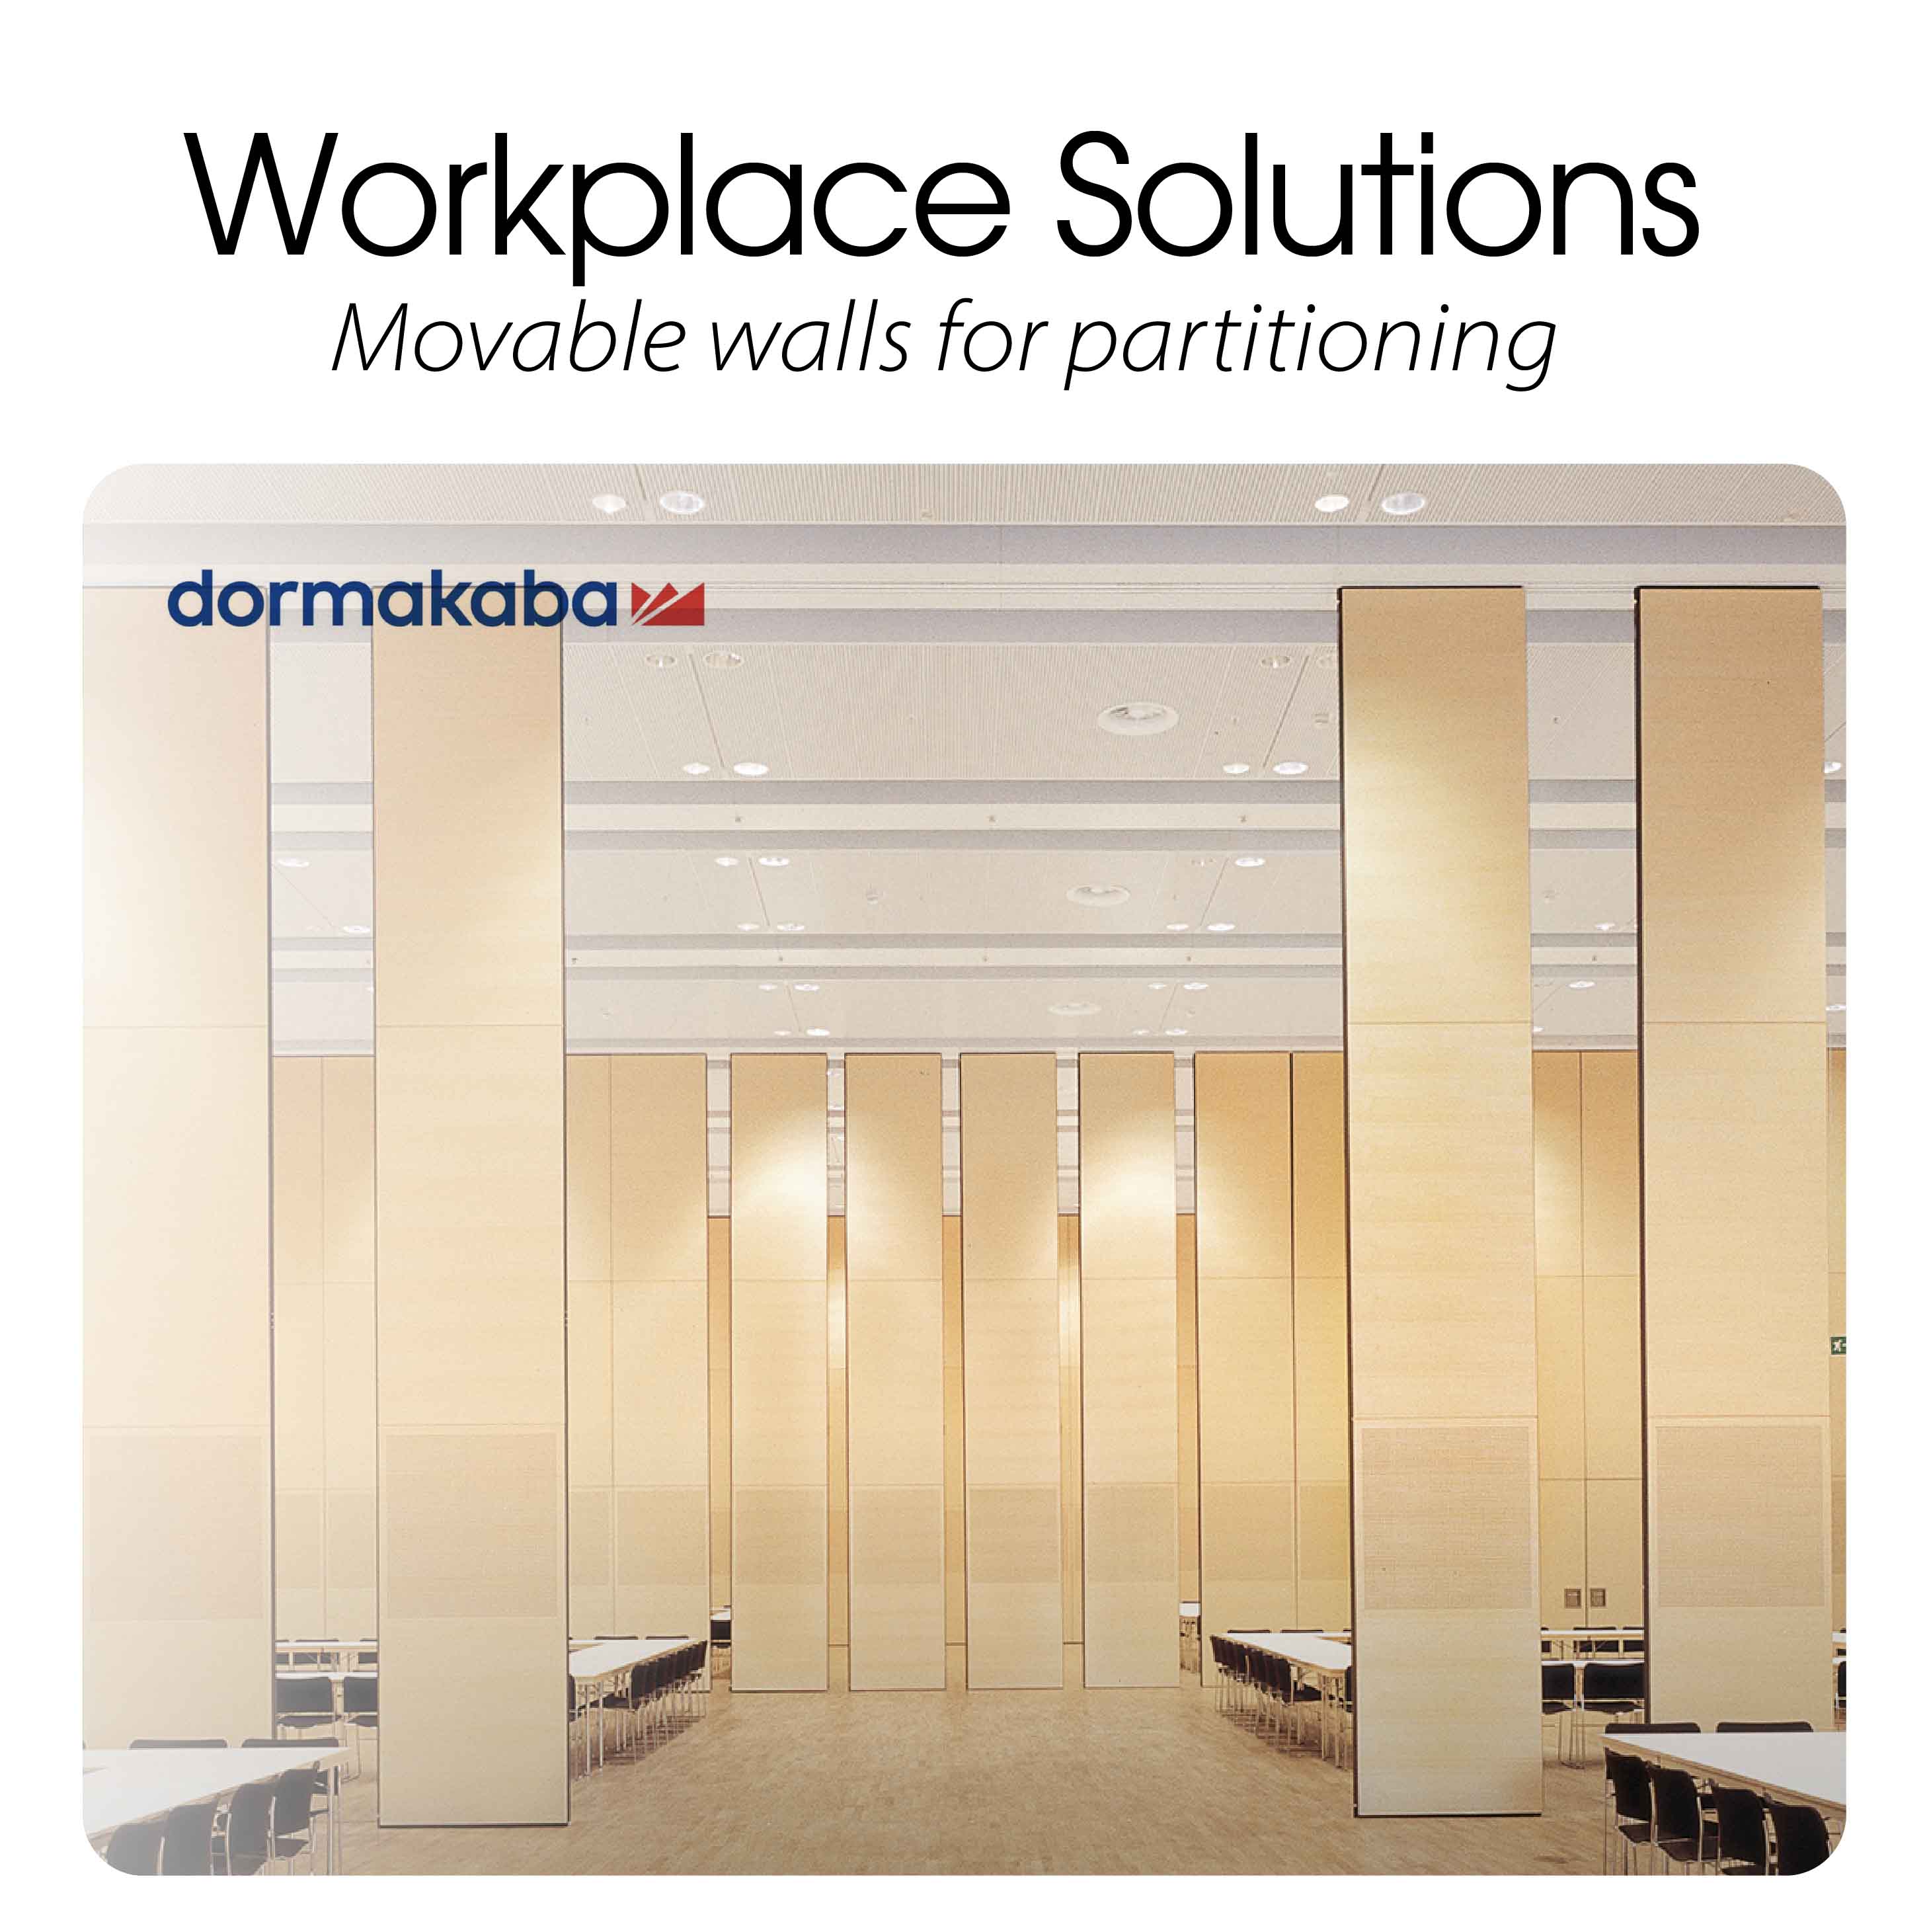 Workplace Solutions | Movable walls for partitioning